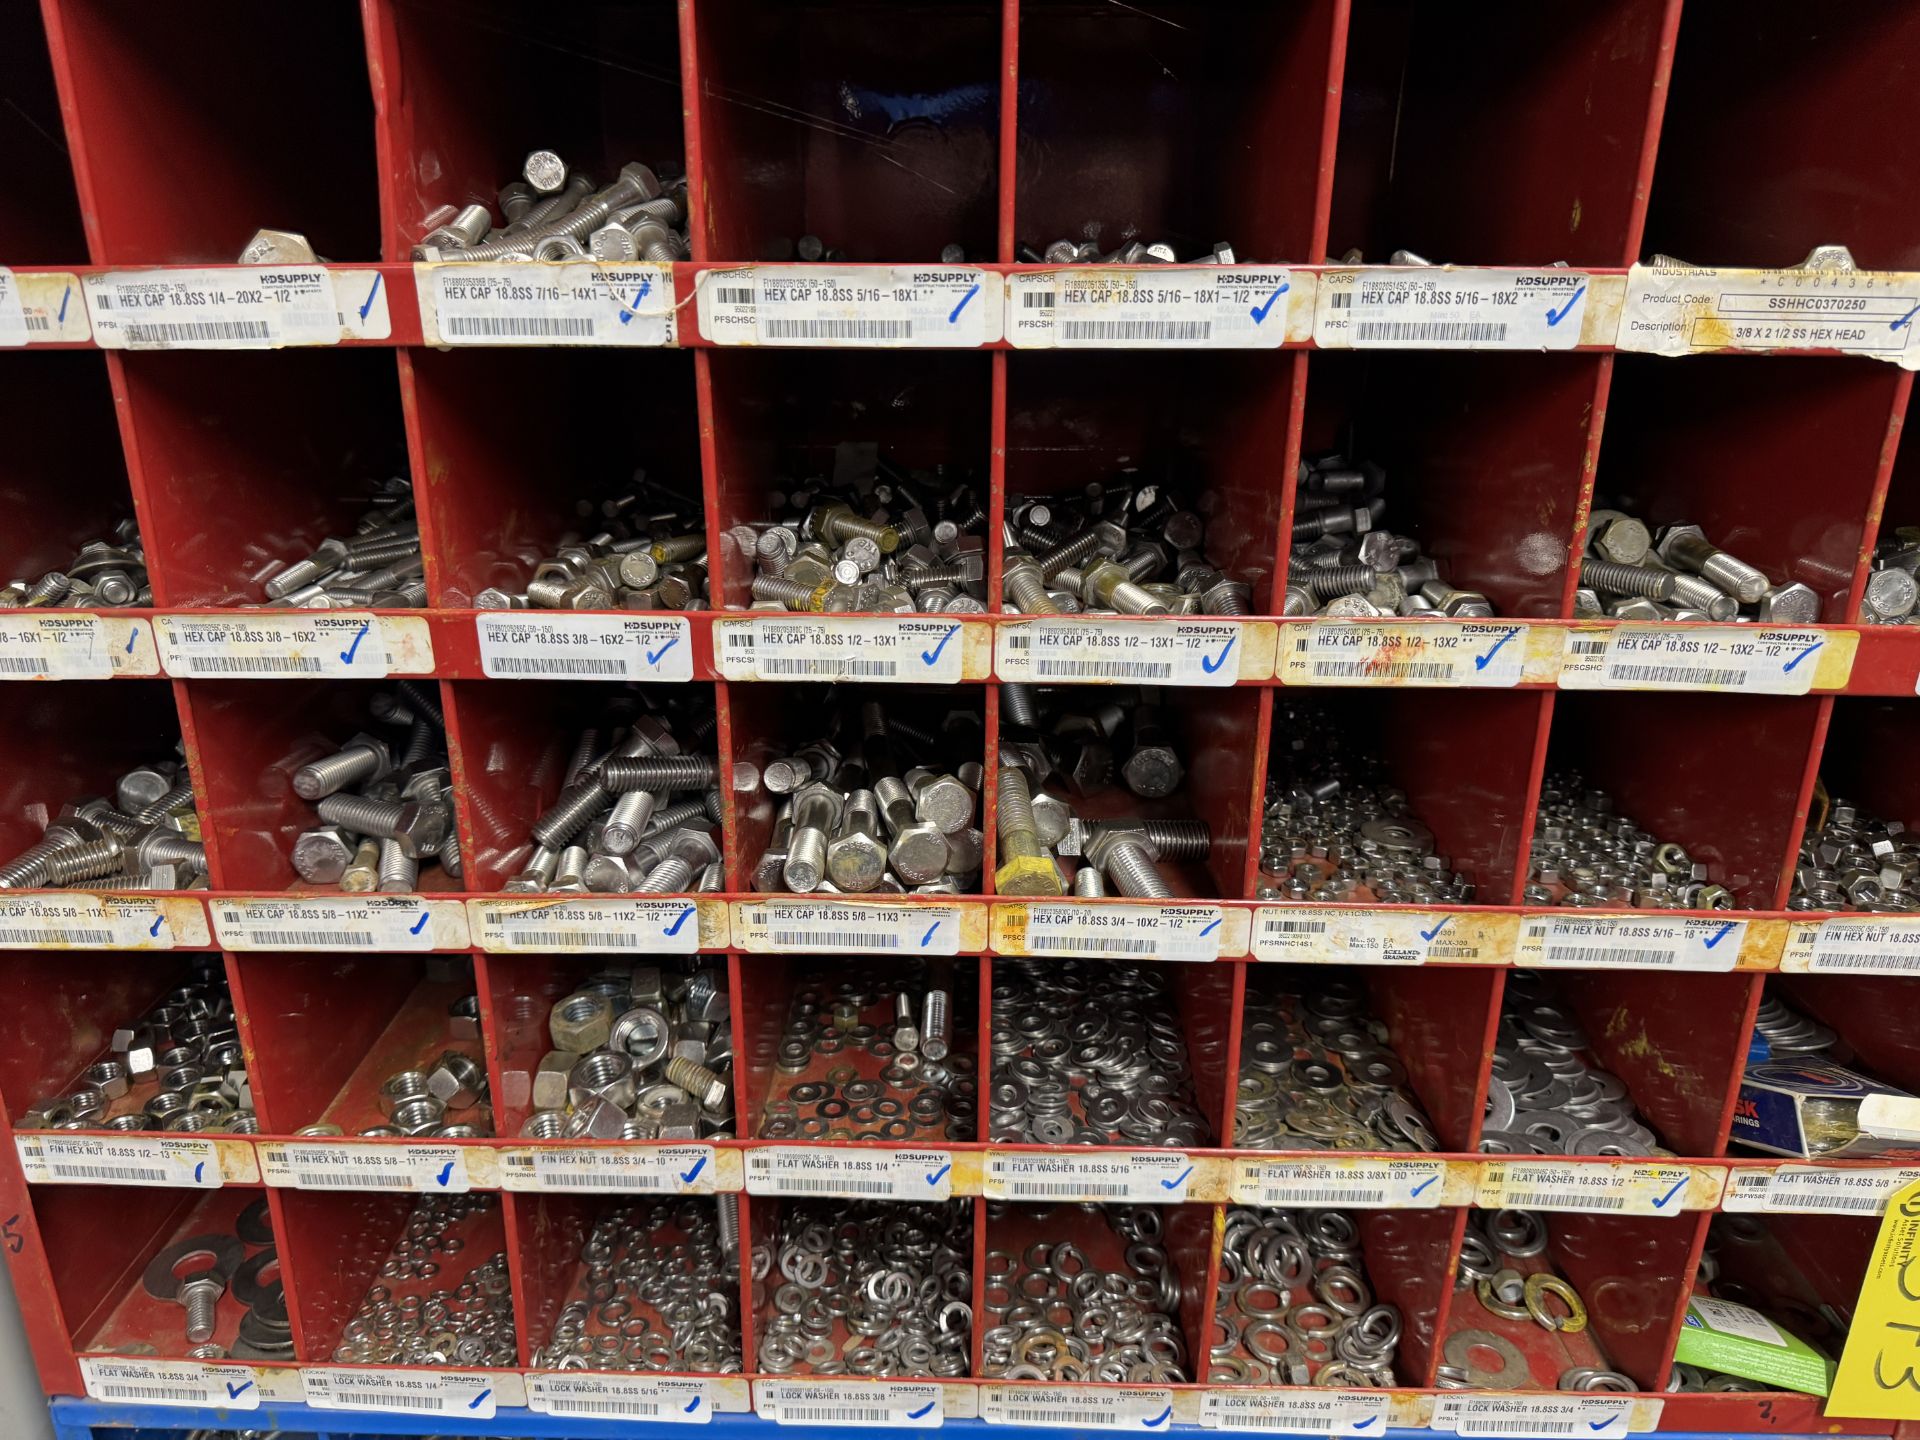 LOT OF (3) PIGEON HOLE CABINETS (224-SLOTS) W/ FASTENER SUPPLIES - Image 3 of 6